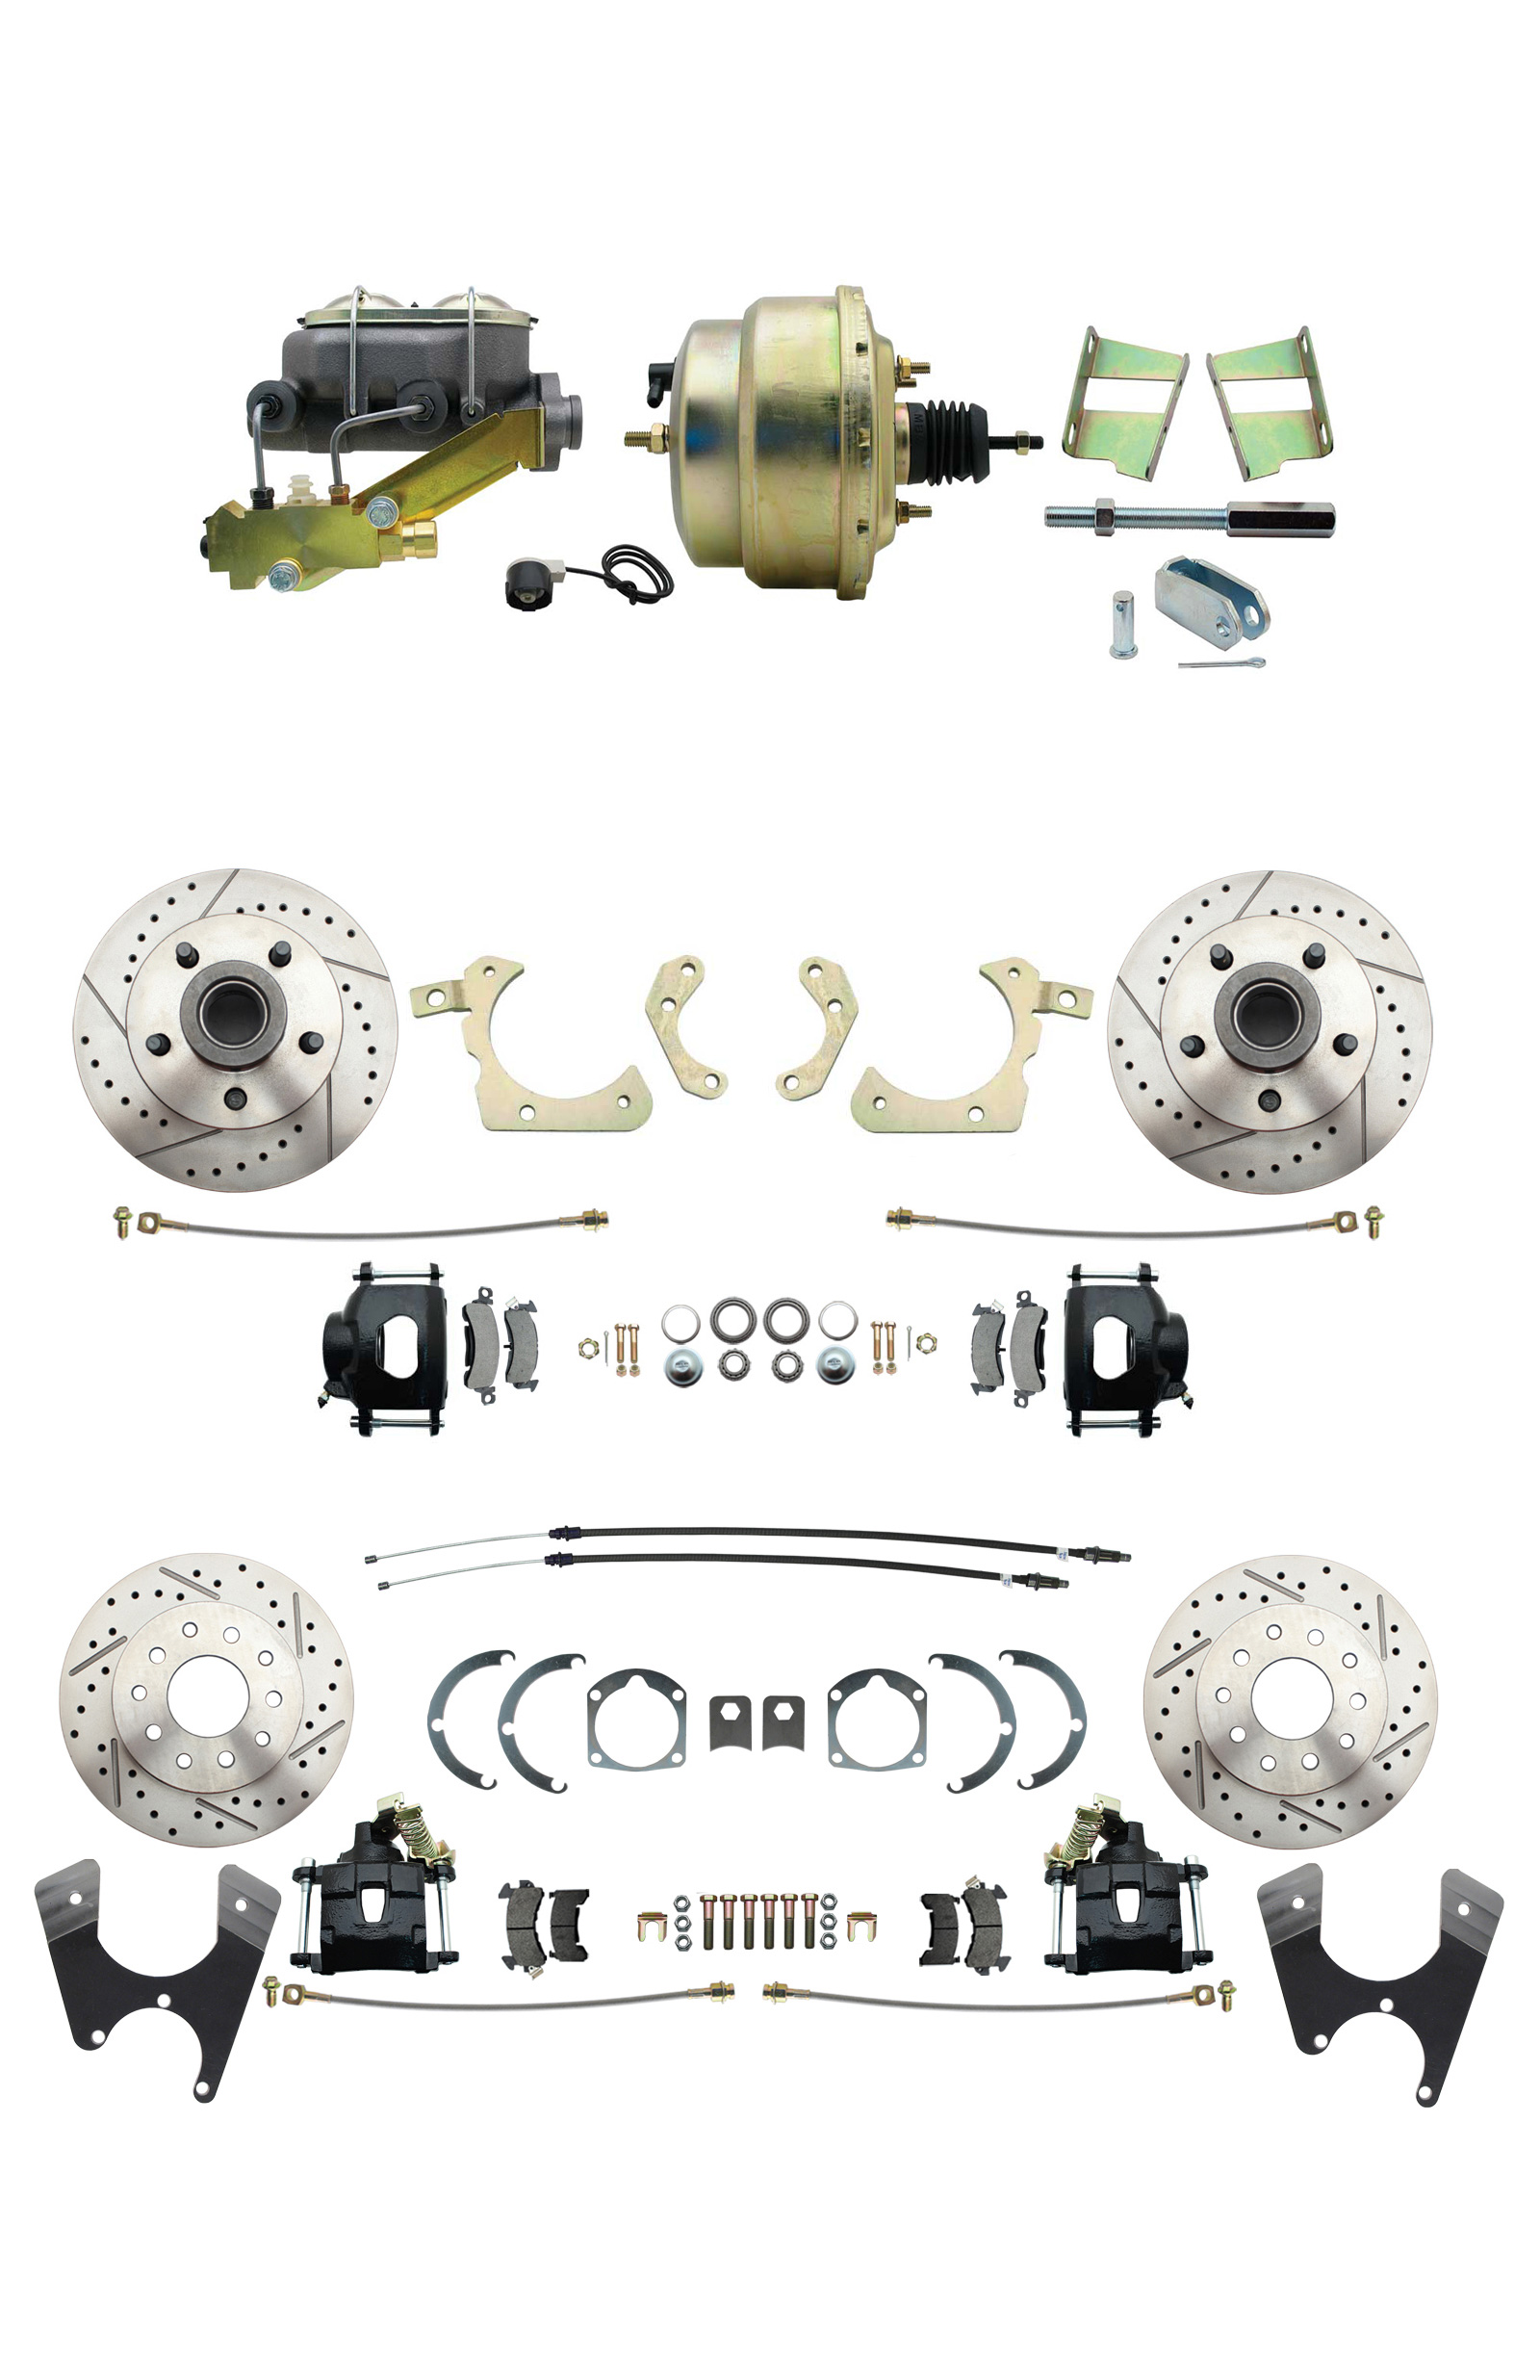 1959-1964 GM Full Size Front & Rear Power Disc Brake Kit Black Powder Coated Calipers Drilled/Slotted Rotors (Impala, Bel Air, Biscayne) & 8 Dual Zinc Booster Conversion Kit W/ Cast Iron Master Cylinder Left Mount Disc/